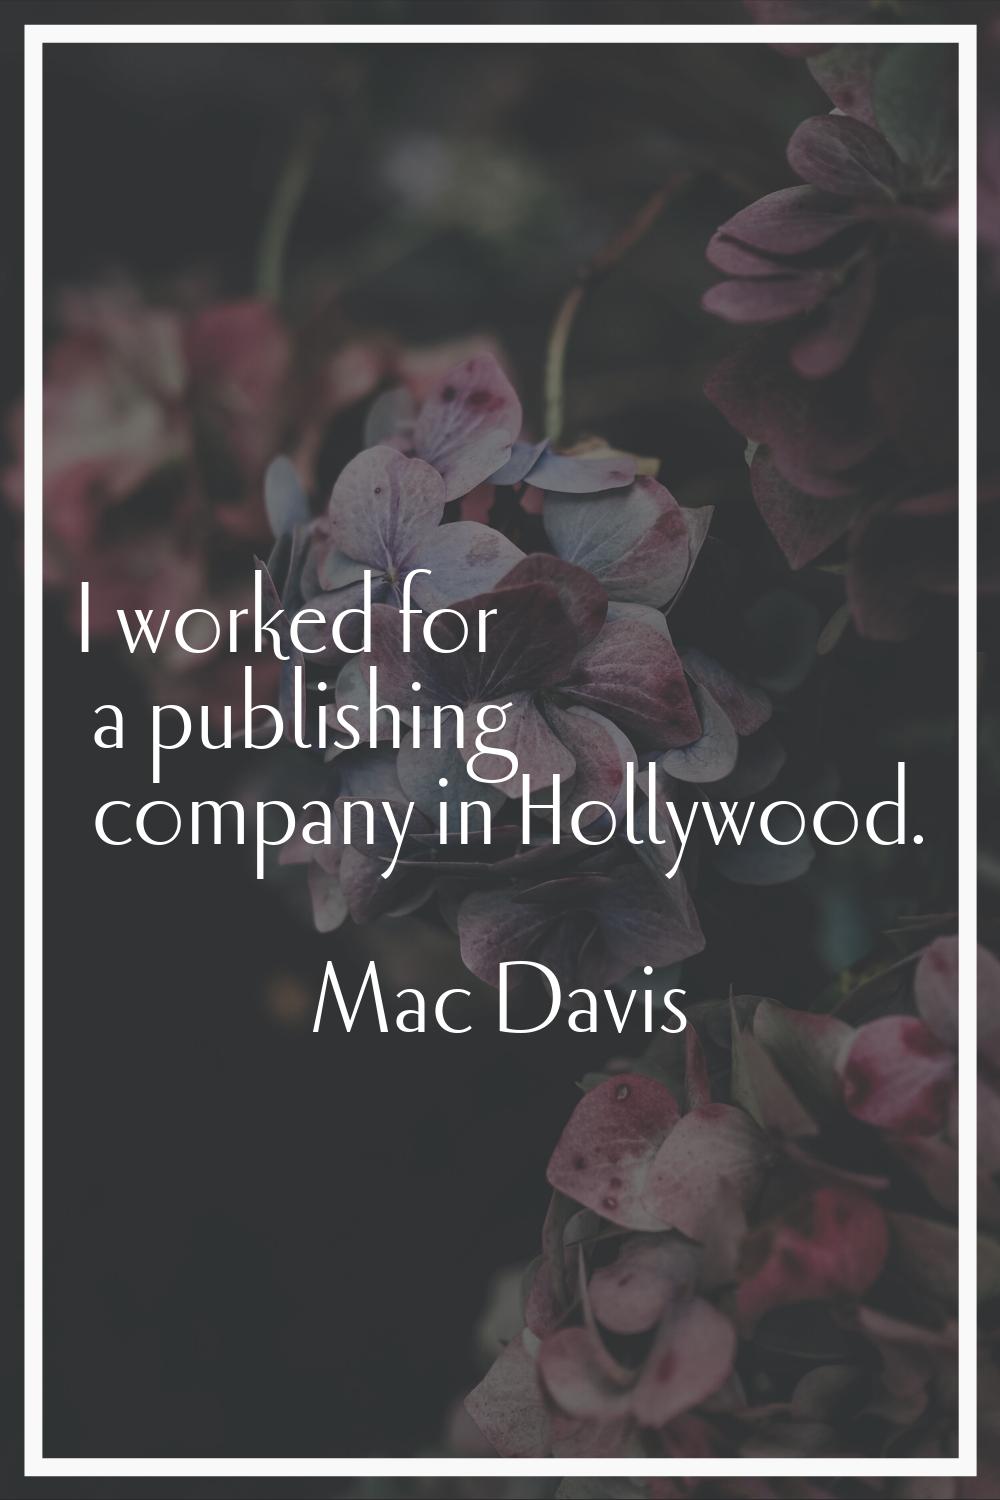 I worked for a publishing company in Hollywood.